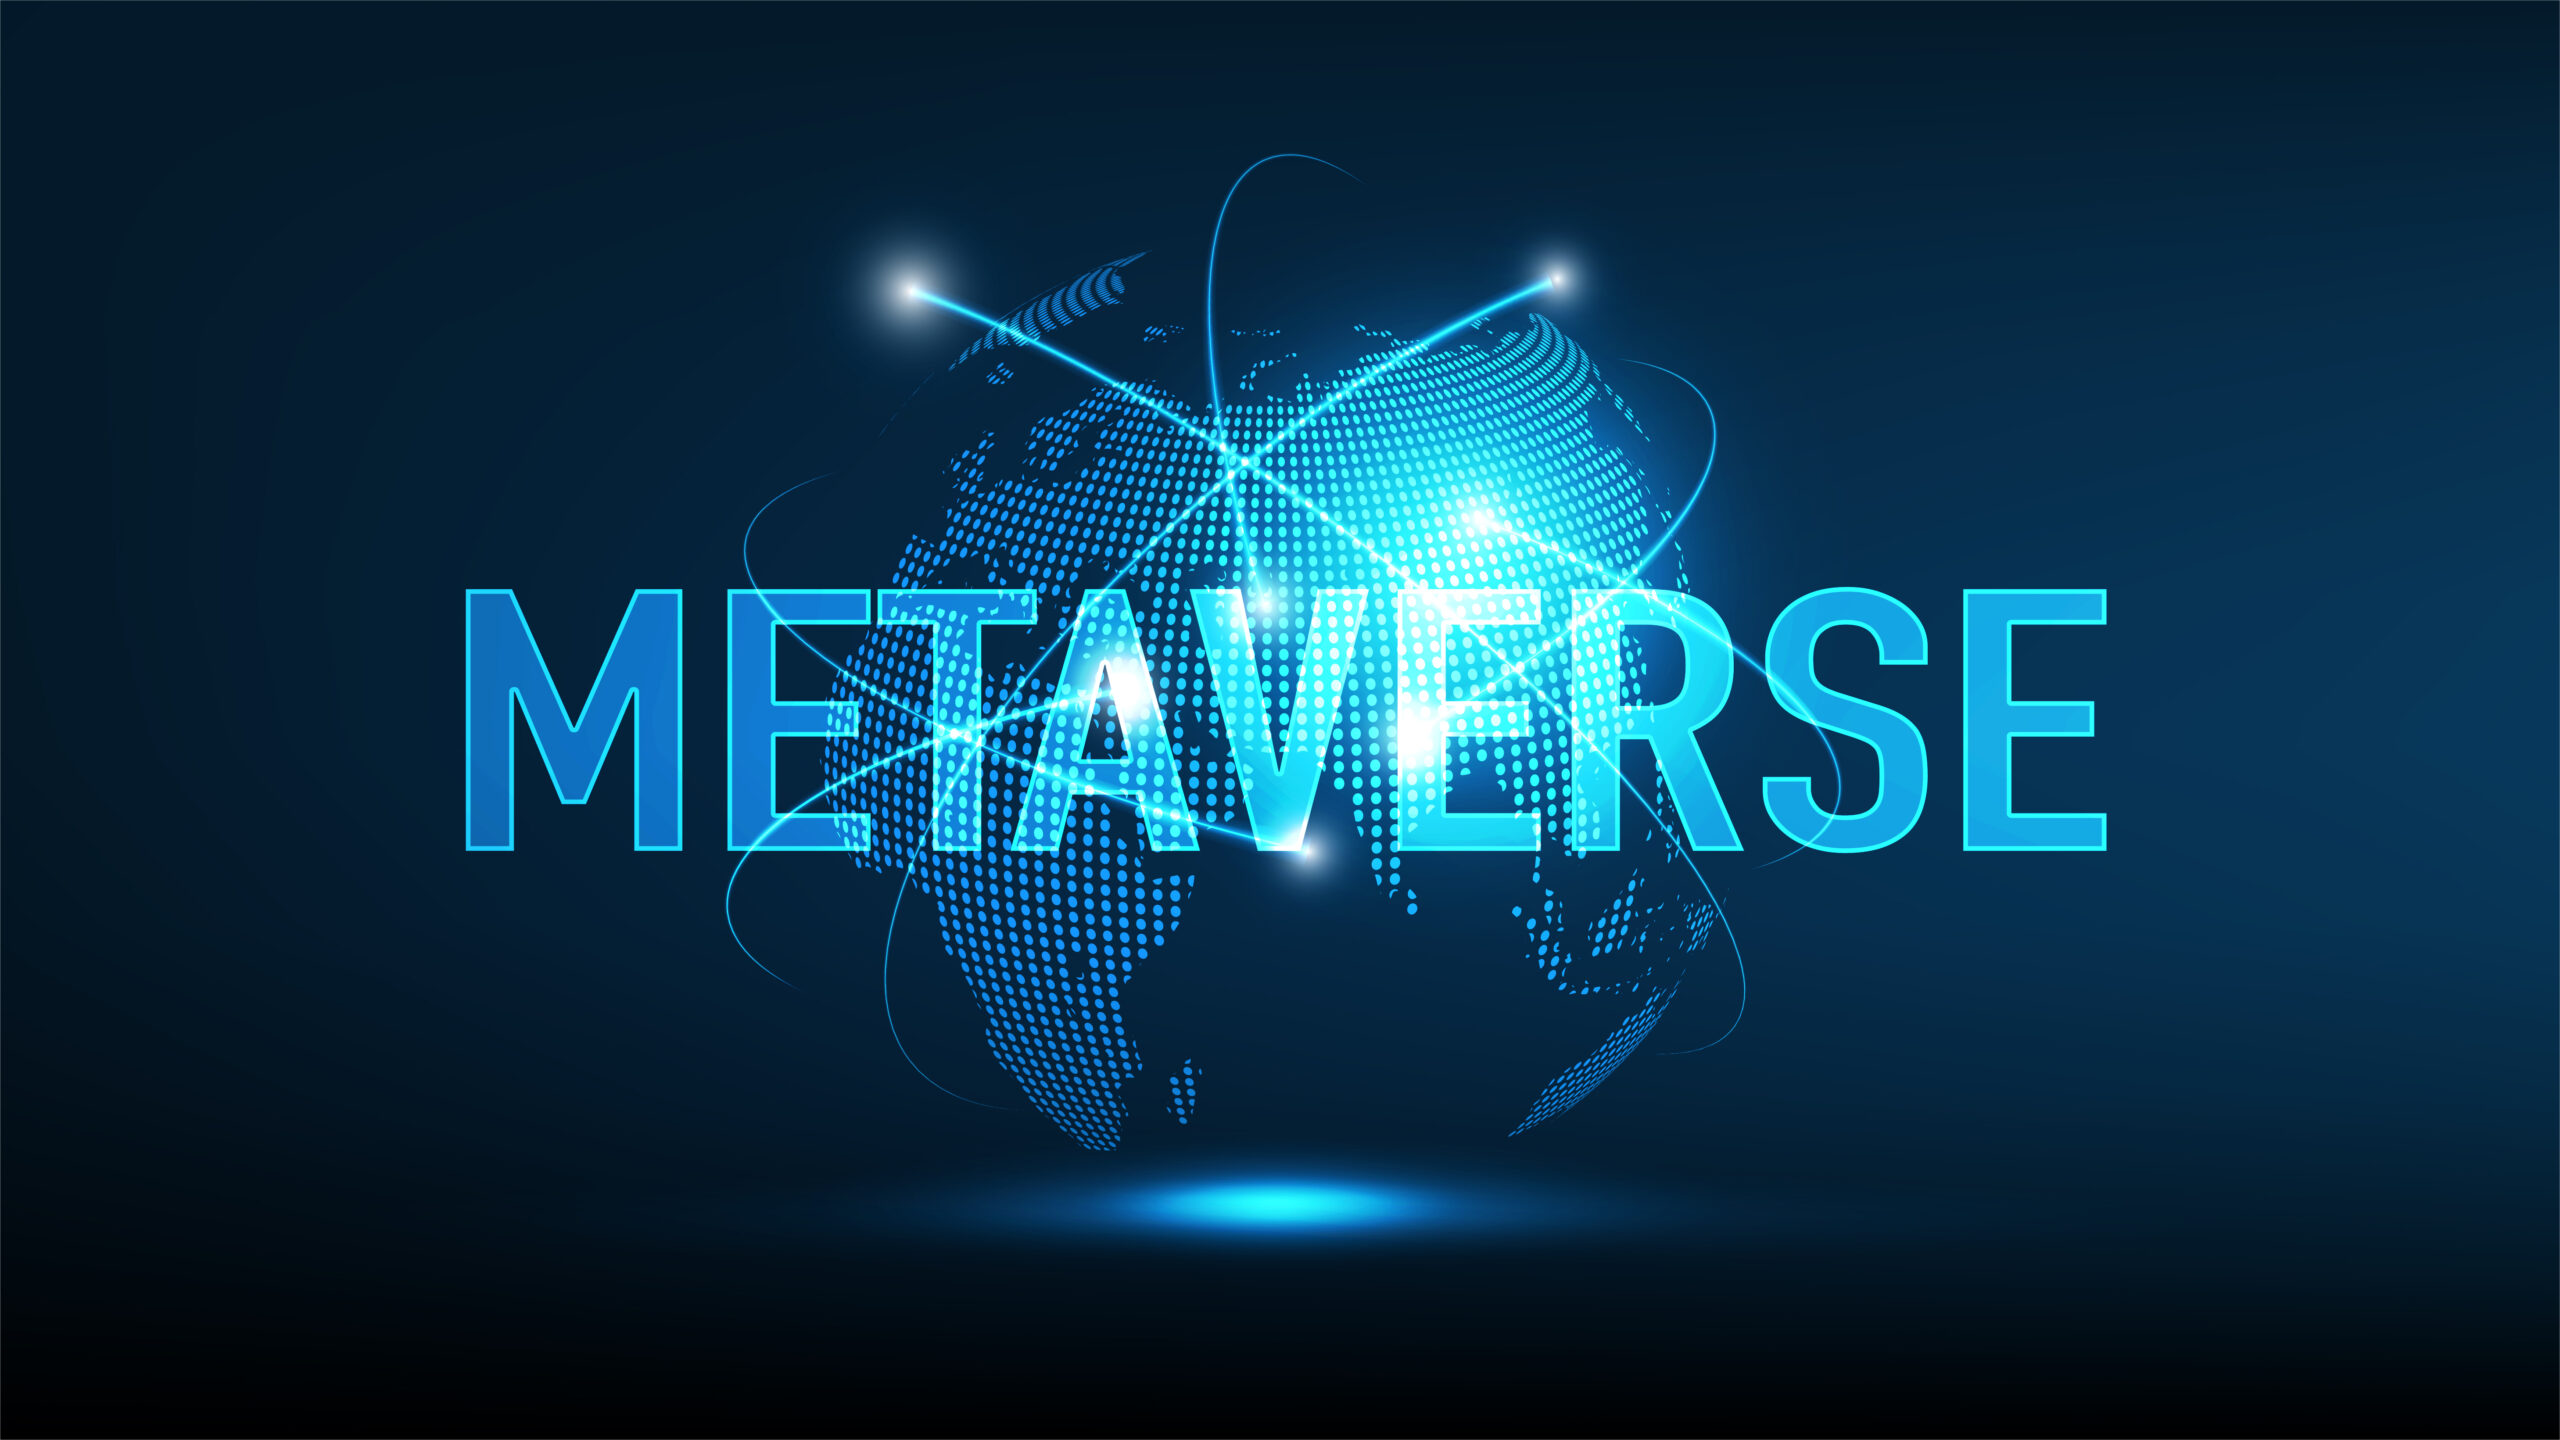 Marketing and the Metaverse